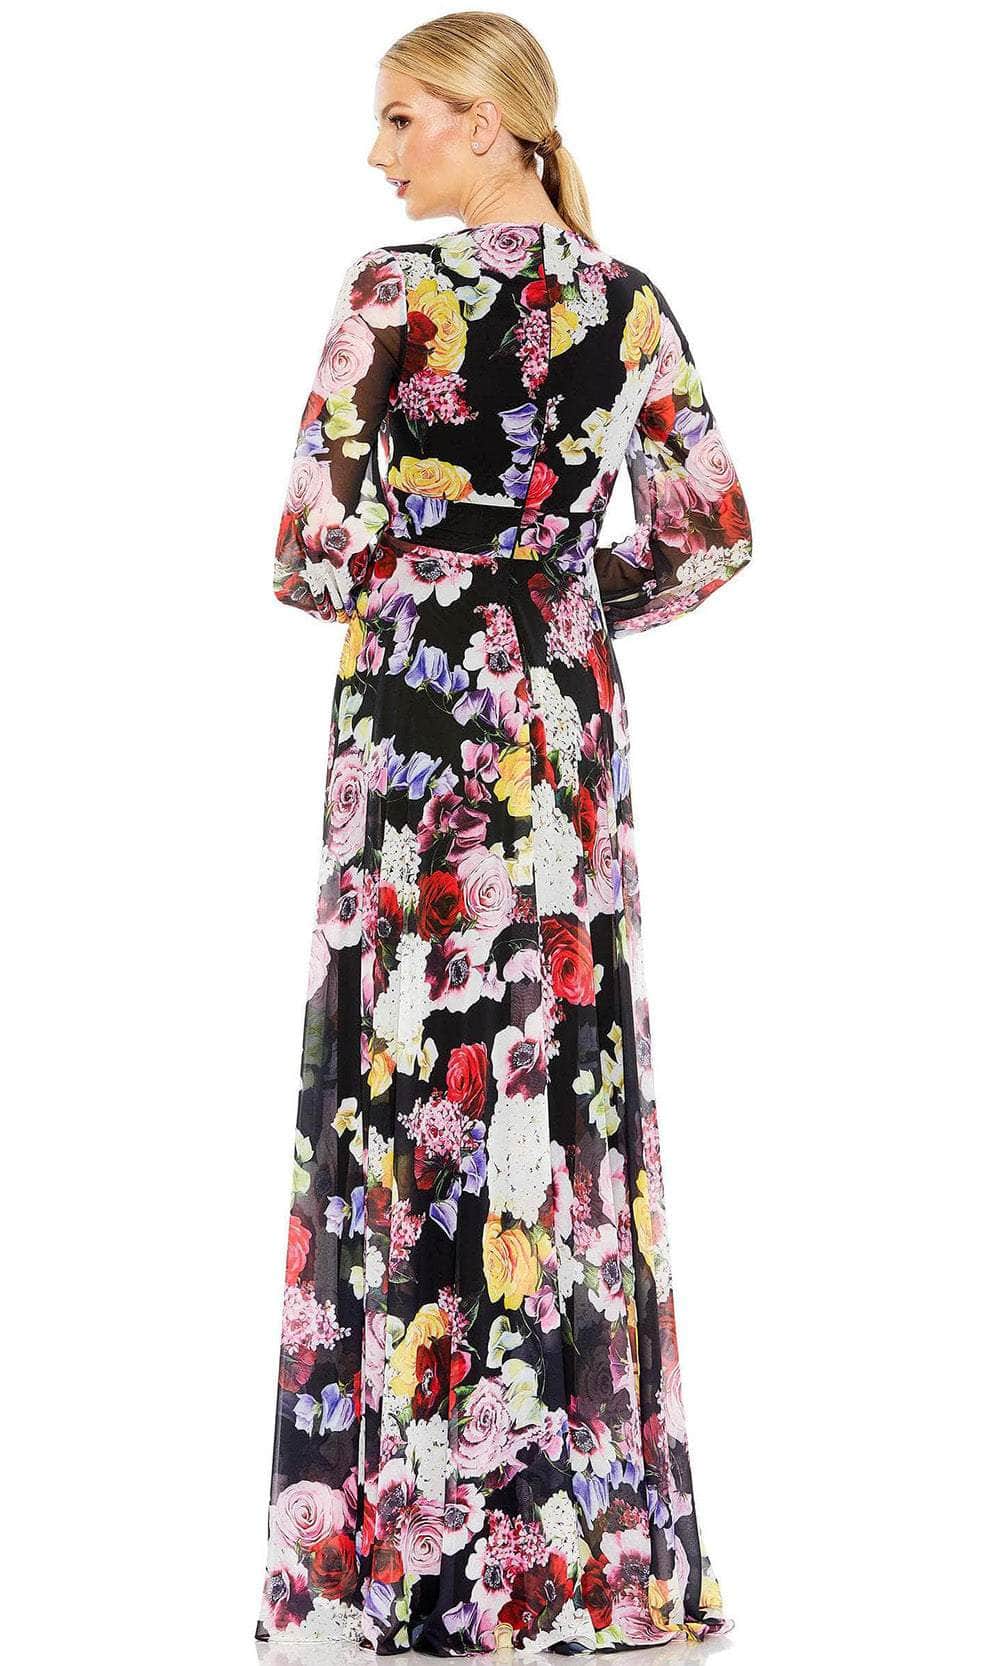 Ieena Duggal 55660 - Long Sleeve Floral Print Evening Gown Special Occasion Dress